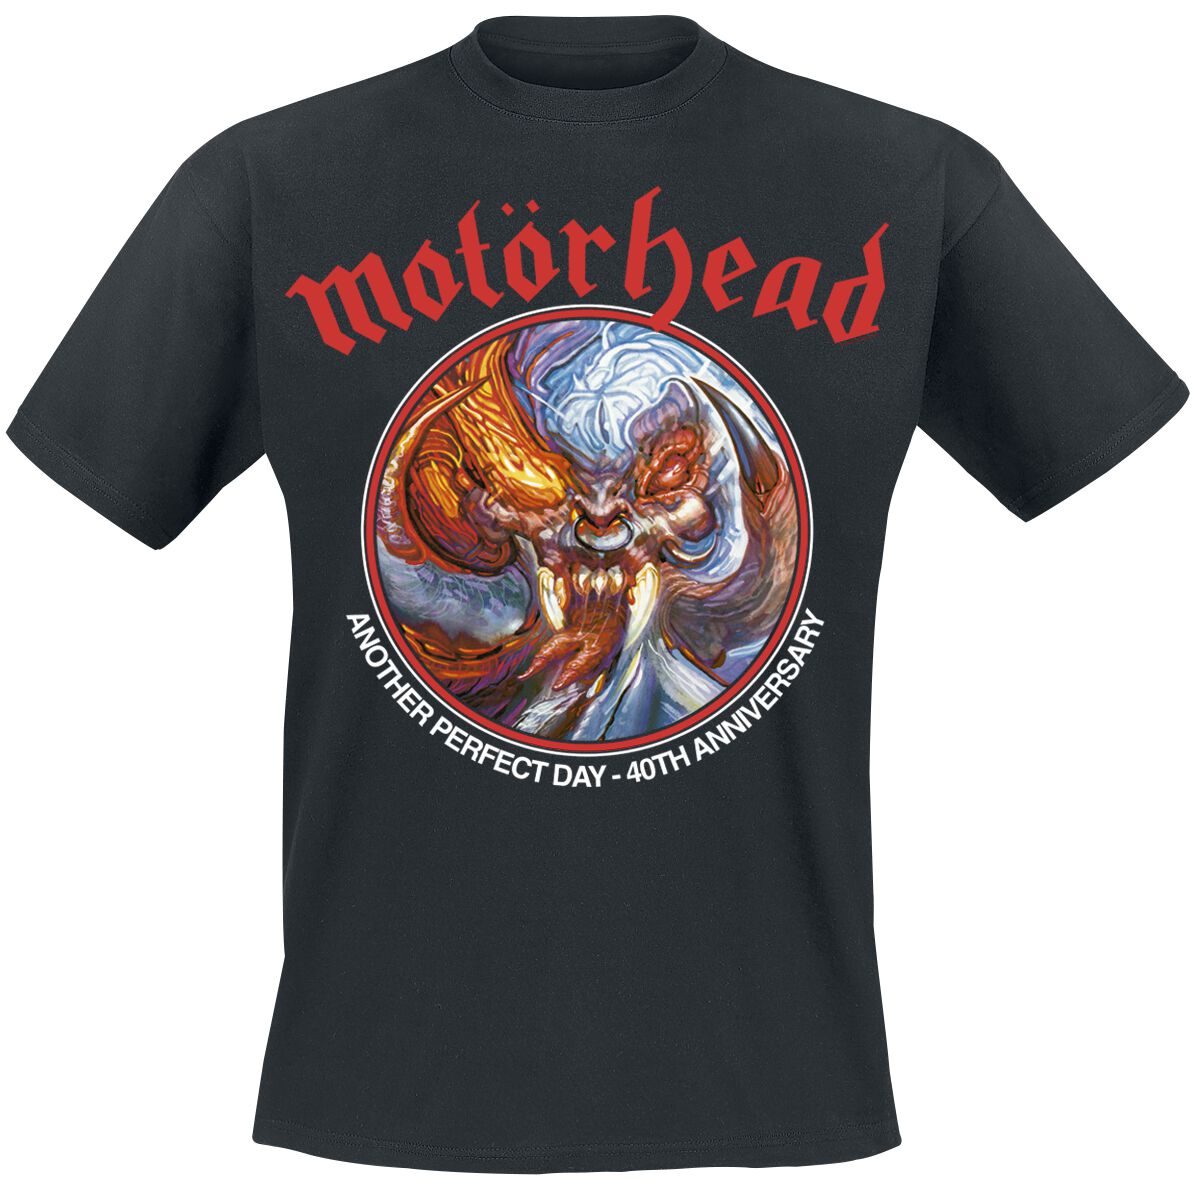 Motörhead Another Perfect Day Anniversary T-Shirt schwarz in L